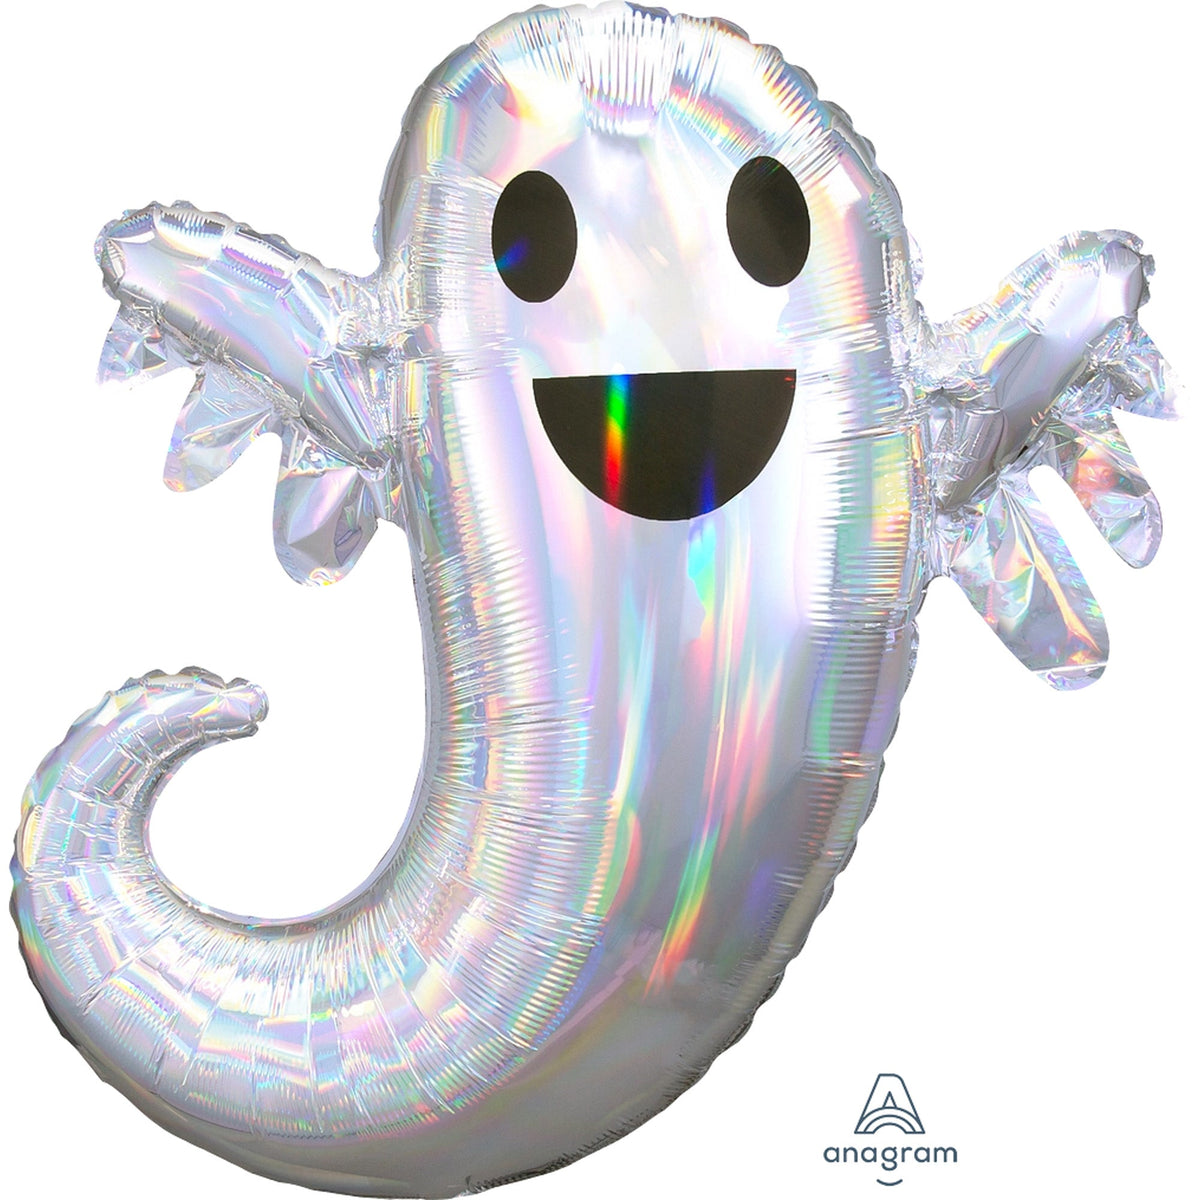 LE GROUPE BLC INTL INC Balloons Halloween Iridescent Ghost Supershape Foil Balloon, 25 x 28 Inches 026635399869